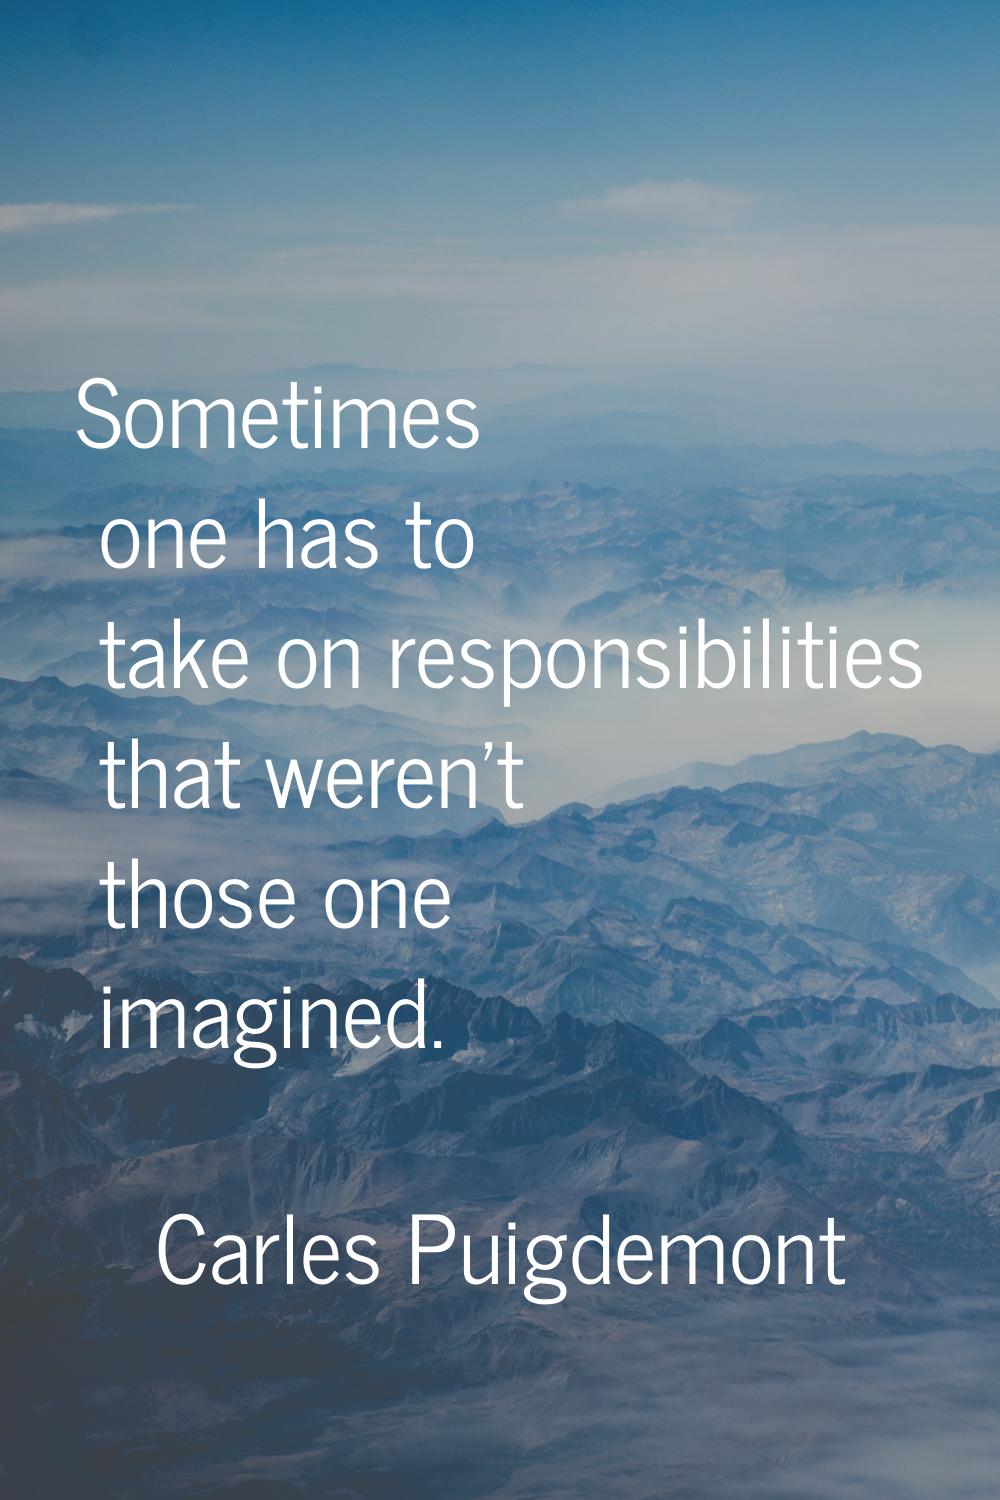 Sometimes one has to take on responsibilities that weren't those one imagined.